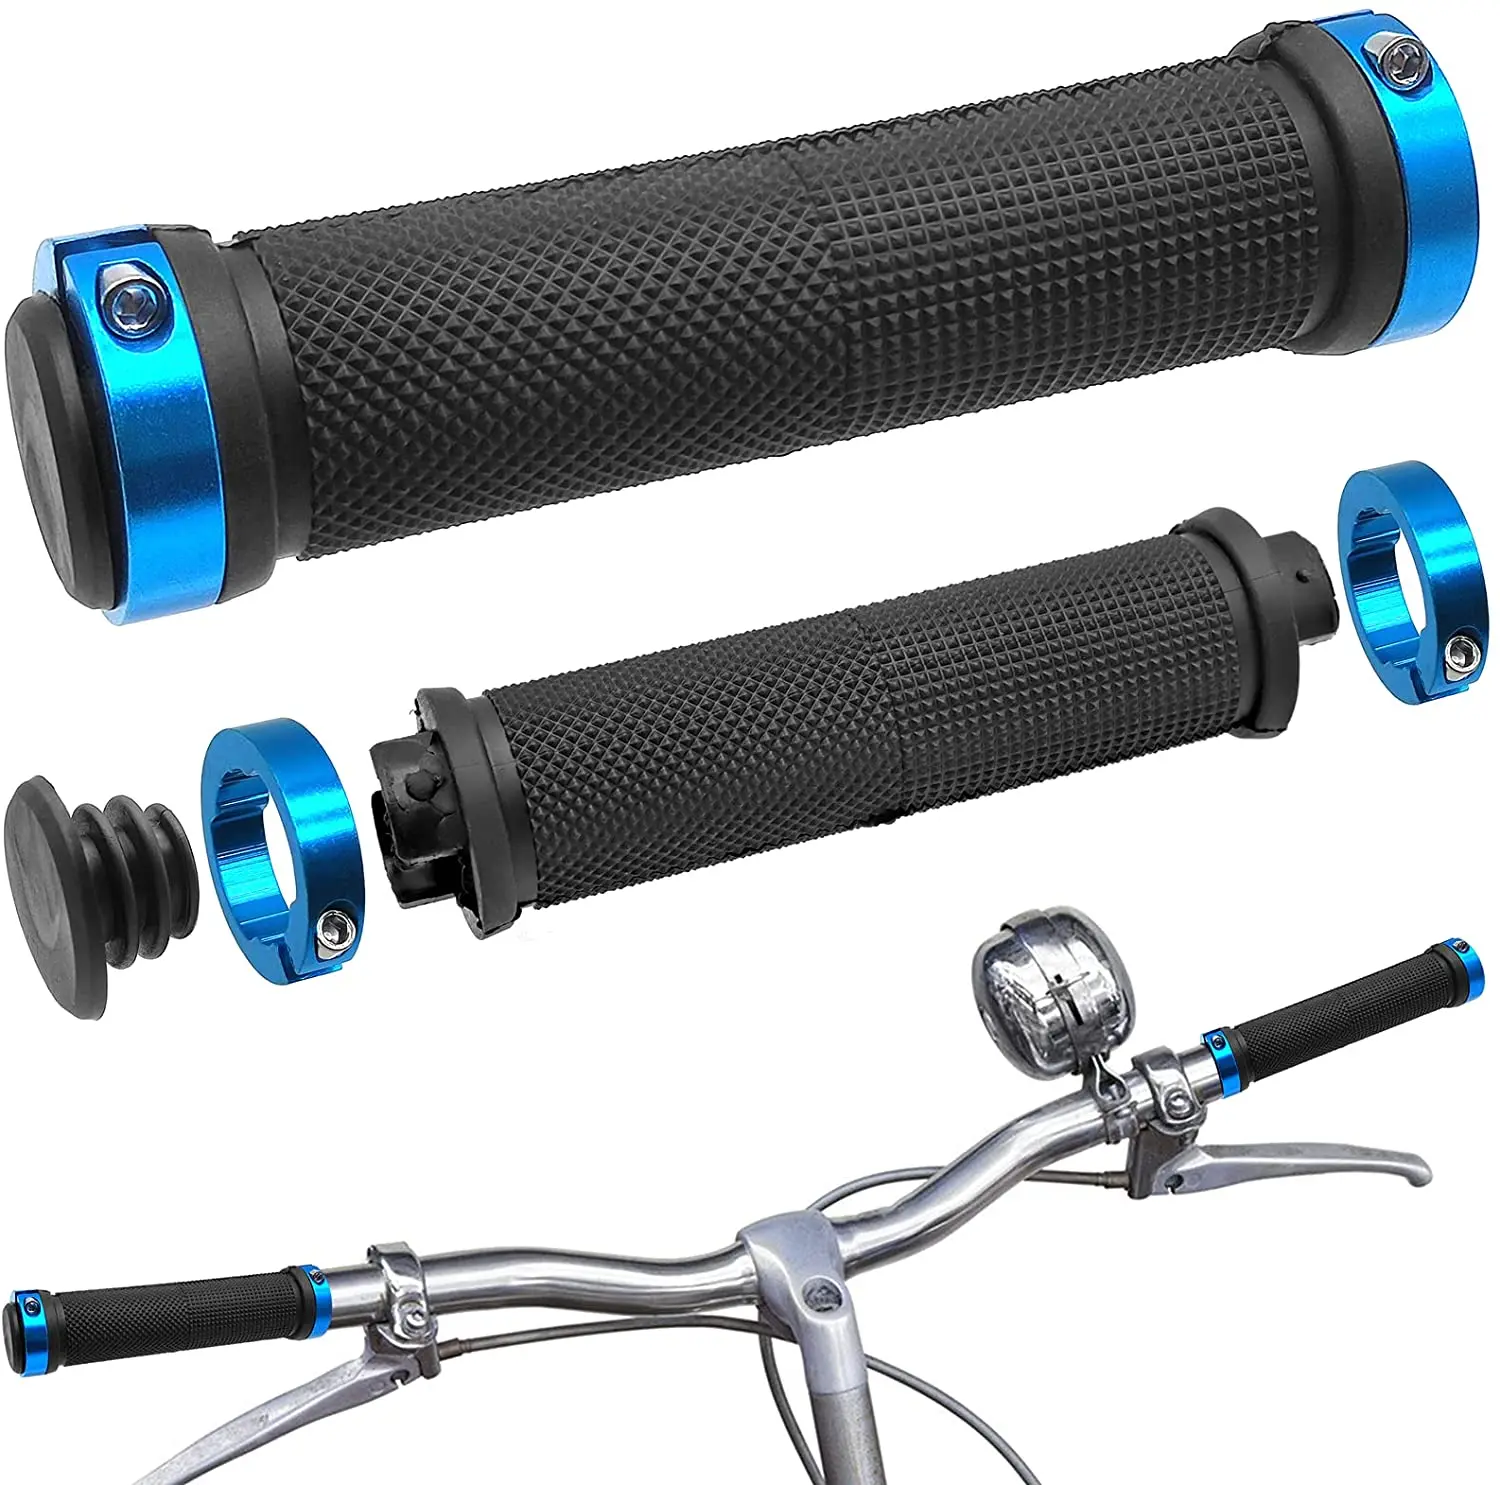 

New Image Bicycle Handlebar Grips Ergonomic Anti-Skid Rubber Lock-onMountain Bike Handlebars End Grips For Bicycle Accessories